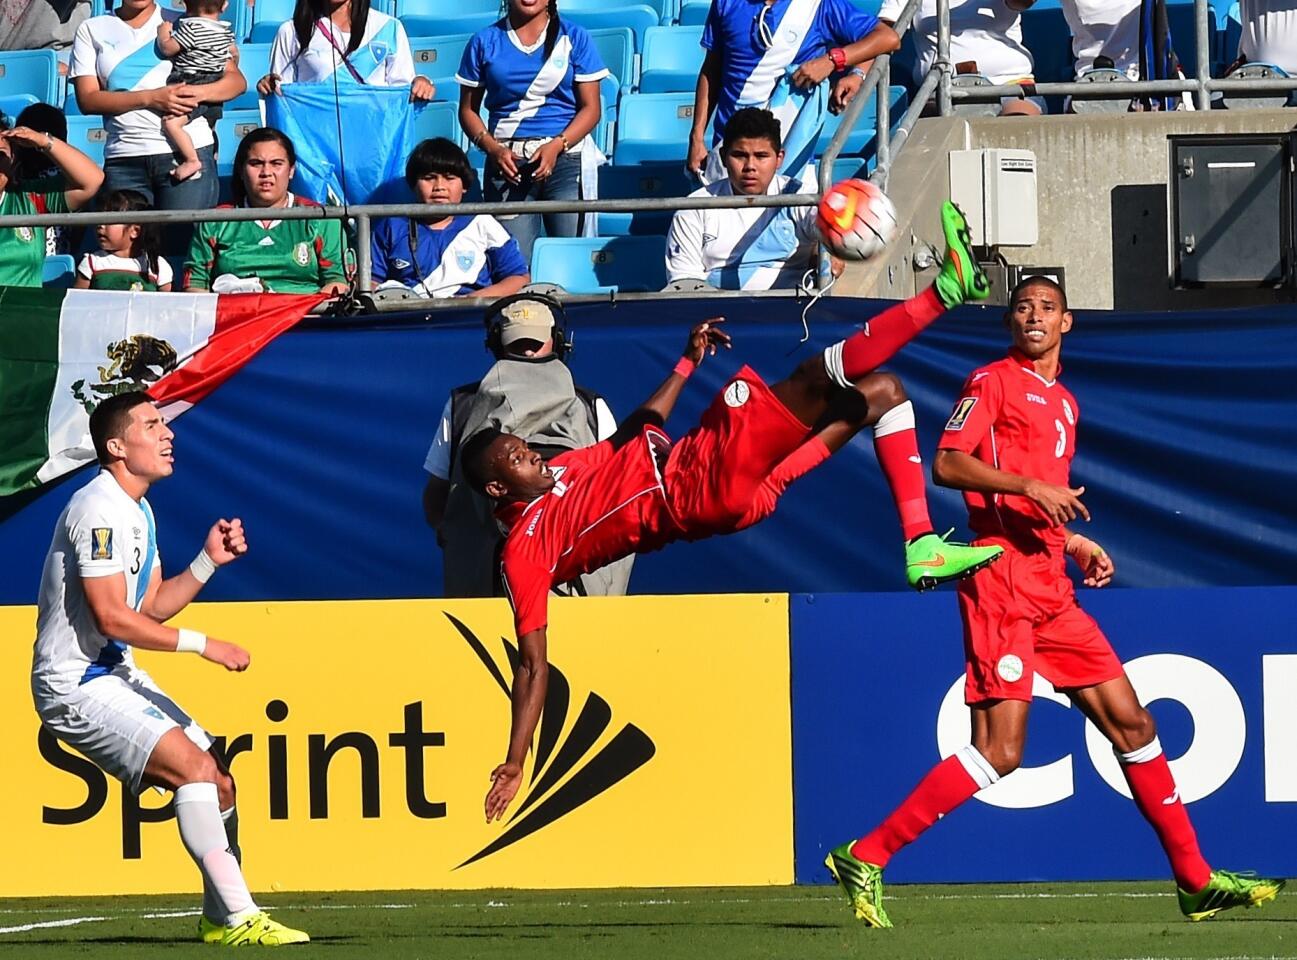 Cuba's Maikel Reyes does a bicycle kick during a CONCACAF Gold Cup Group C match against Guatemala in Charlotte, North Carolina, on July 15, 2015. AFP PHOTO/NICHOLAS KAMMNICHOLAS KAMM/AFP/Getty Images ** OUTS - ELSENT, FPG - OUTS * NM, PH, VA if sourced by CT, LA or MoD **